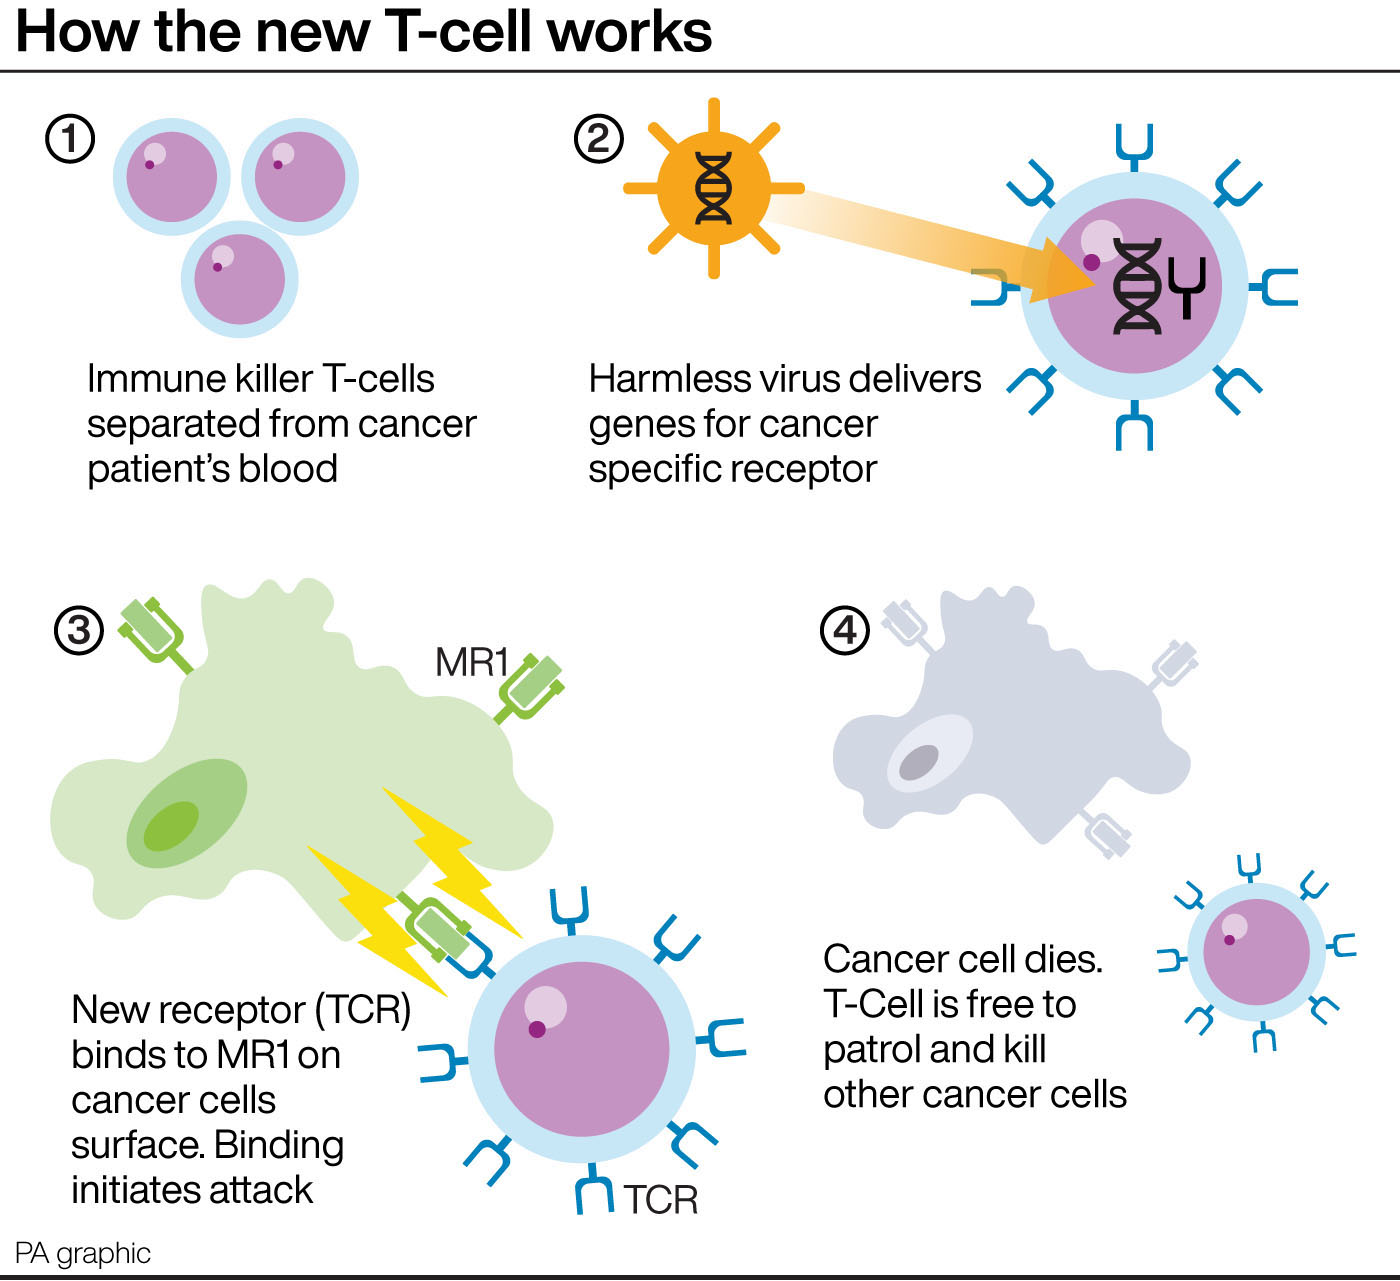 How a new type of T-cell works